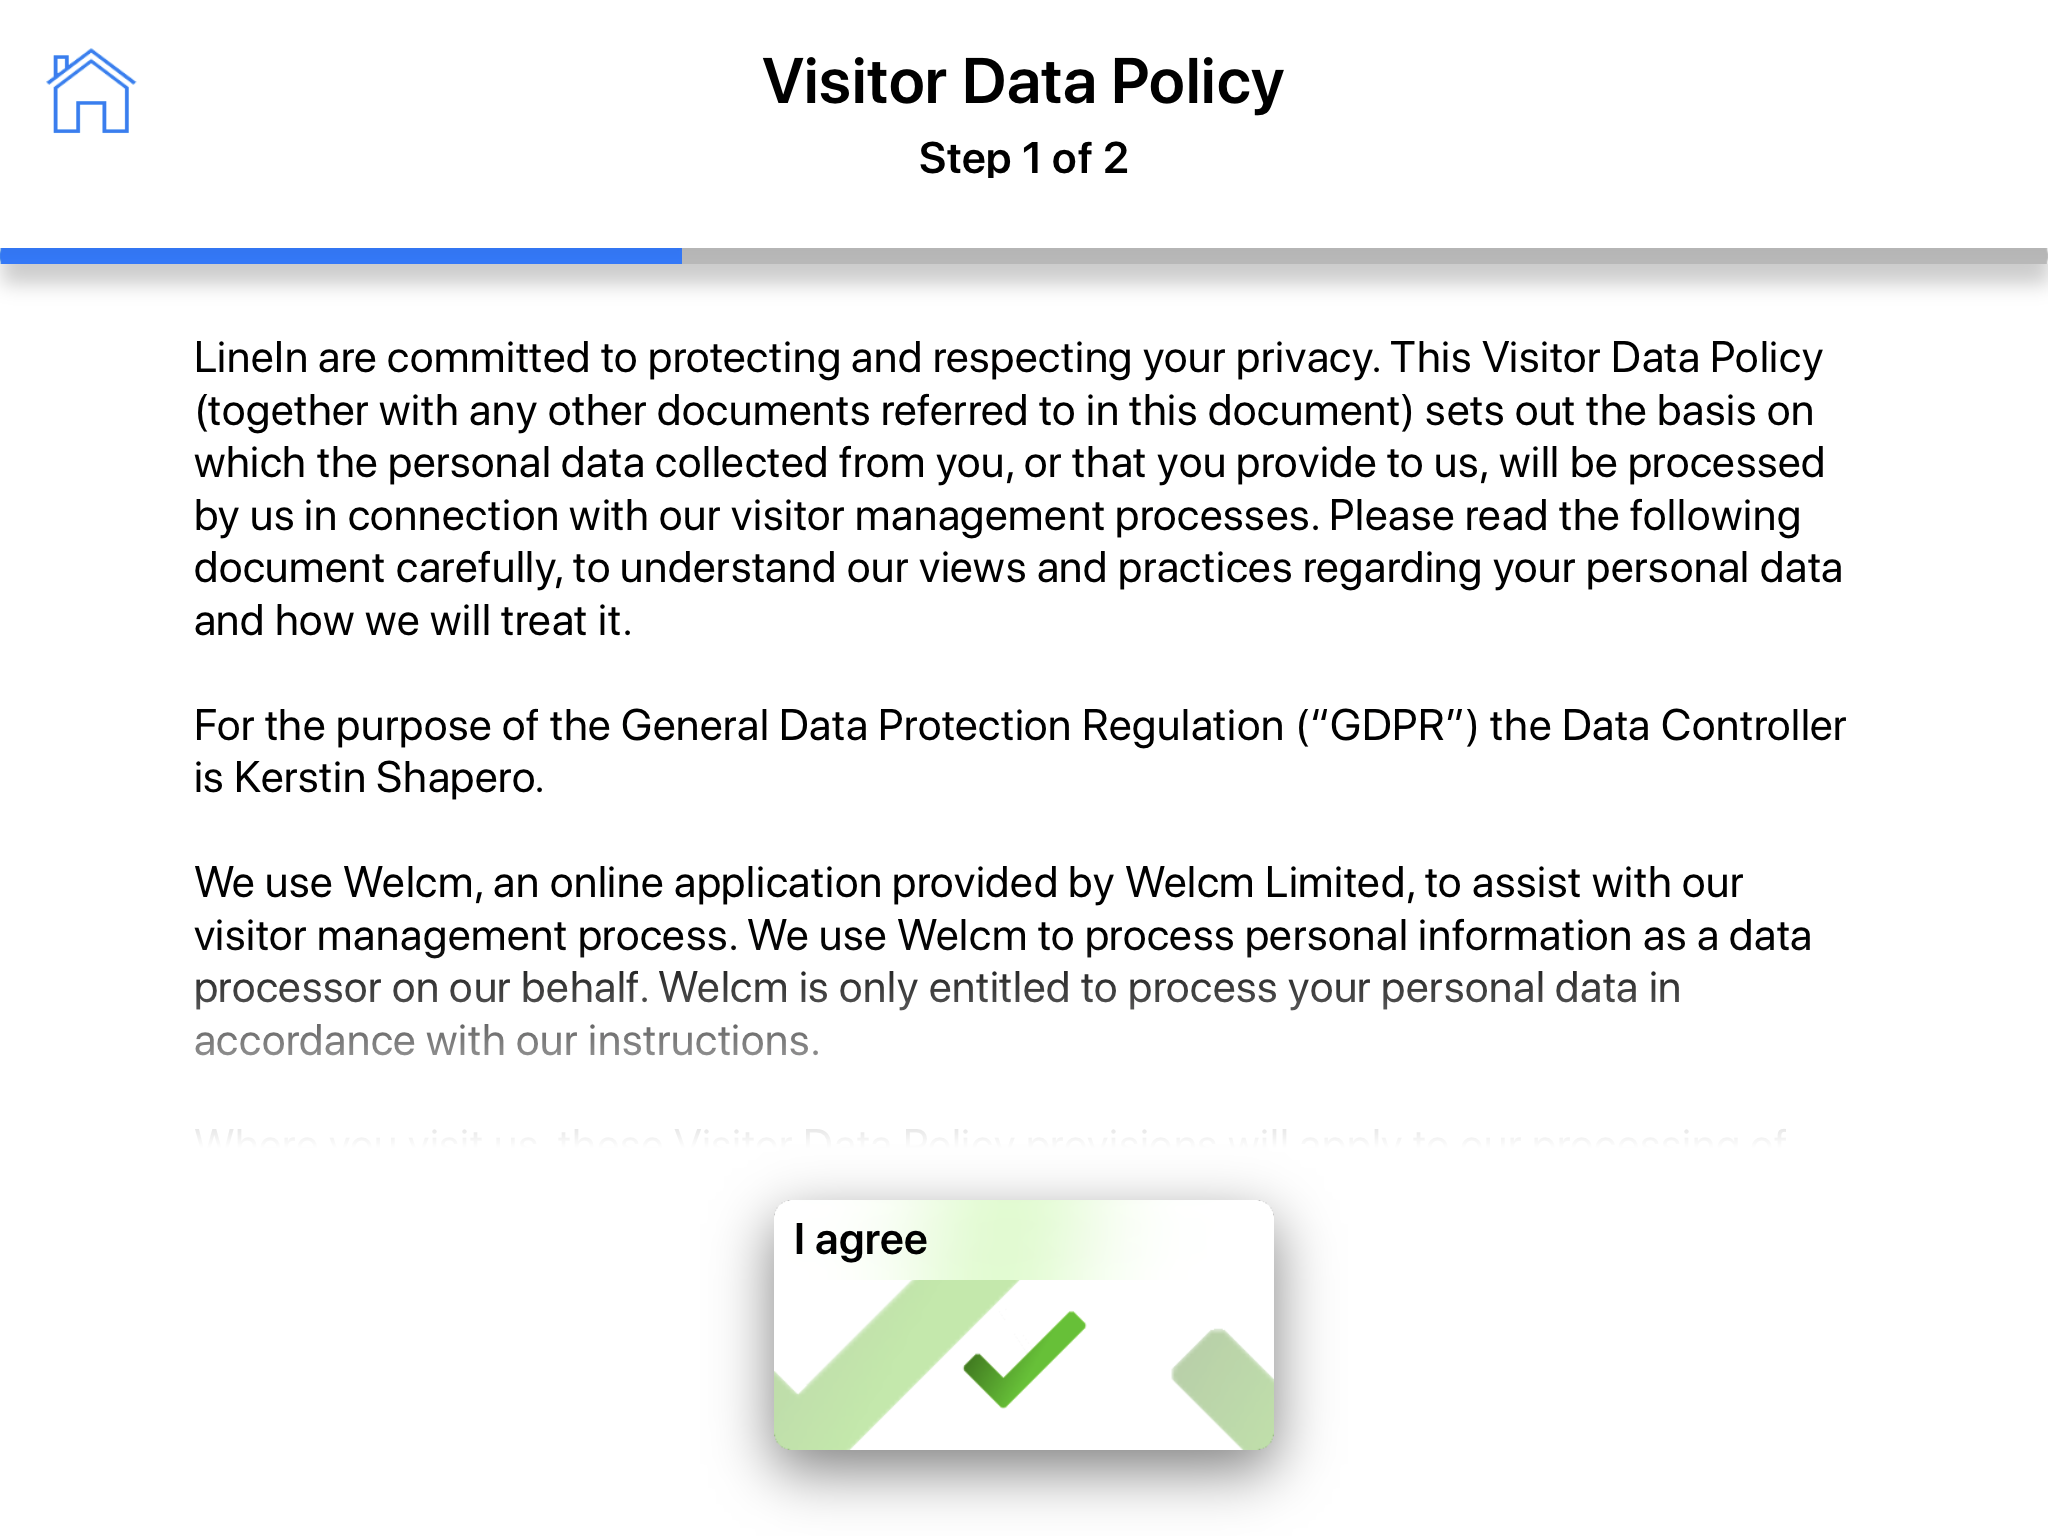 Visitor data policy